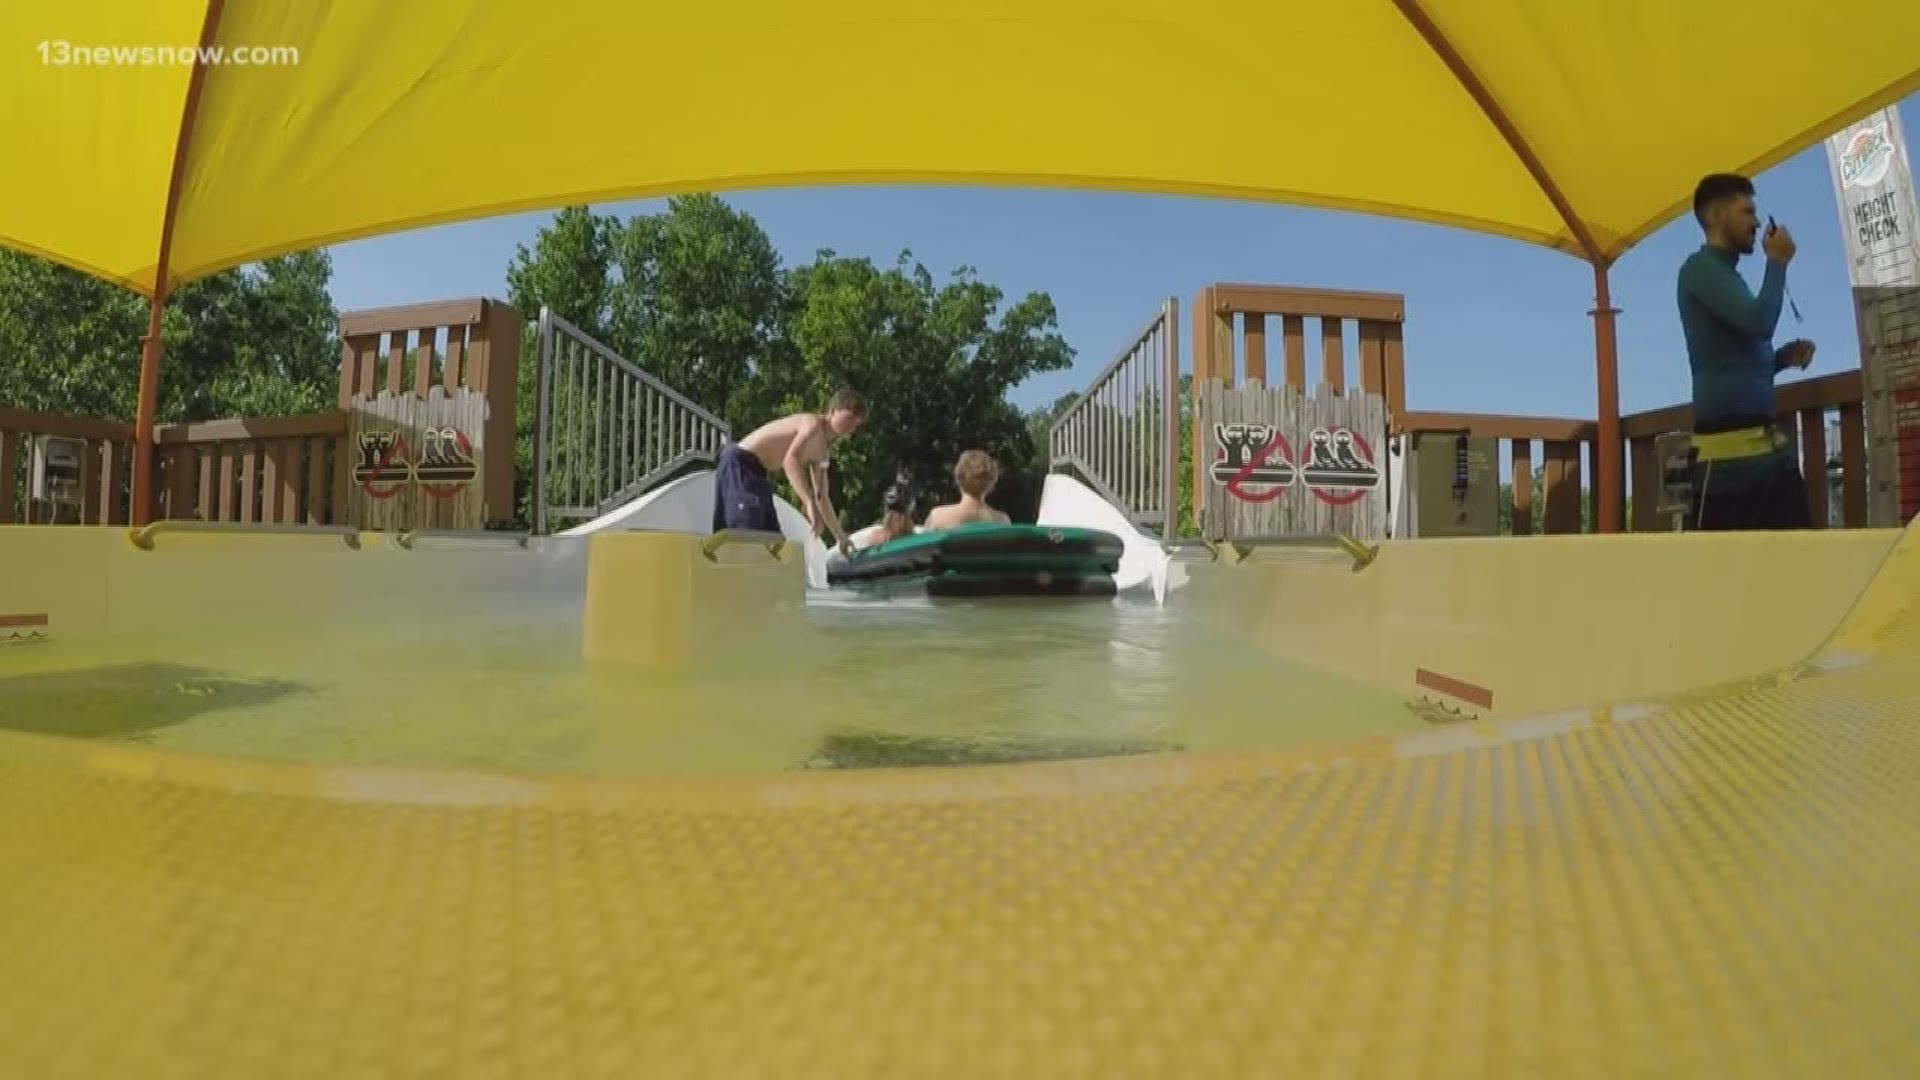 It's called 'Cutback Water Coaster.' You can pile on a 4-person raft, and speed down a nearly 900-foot long slide.